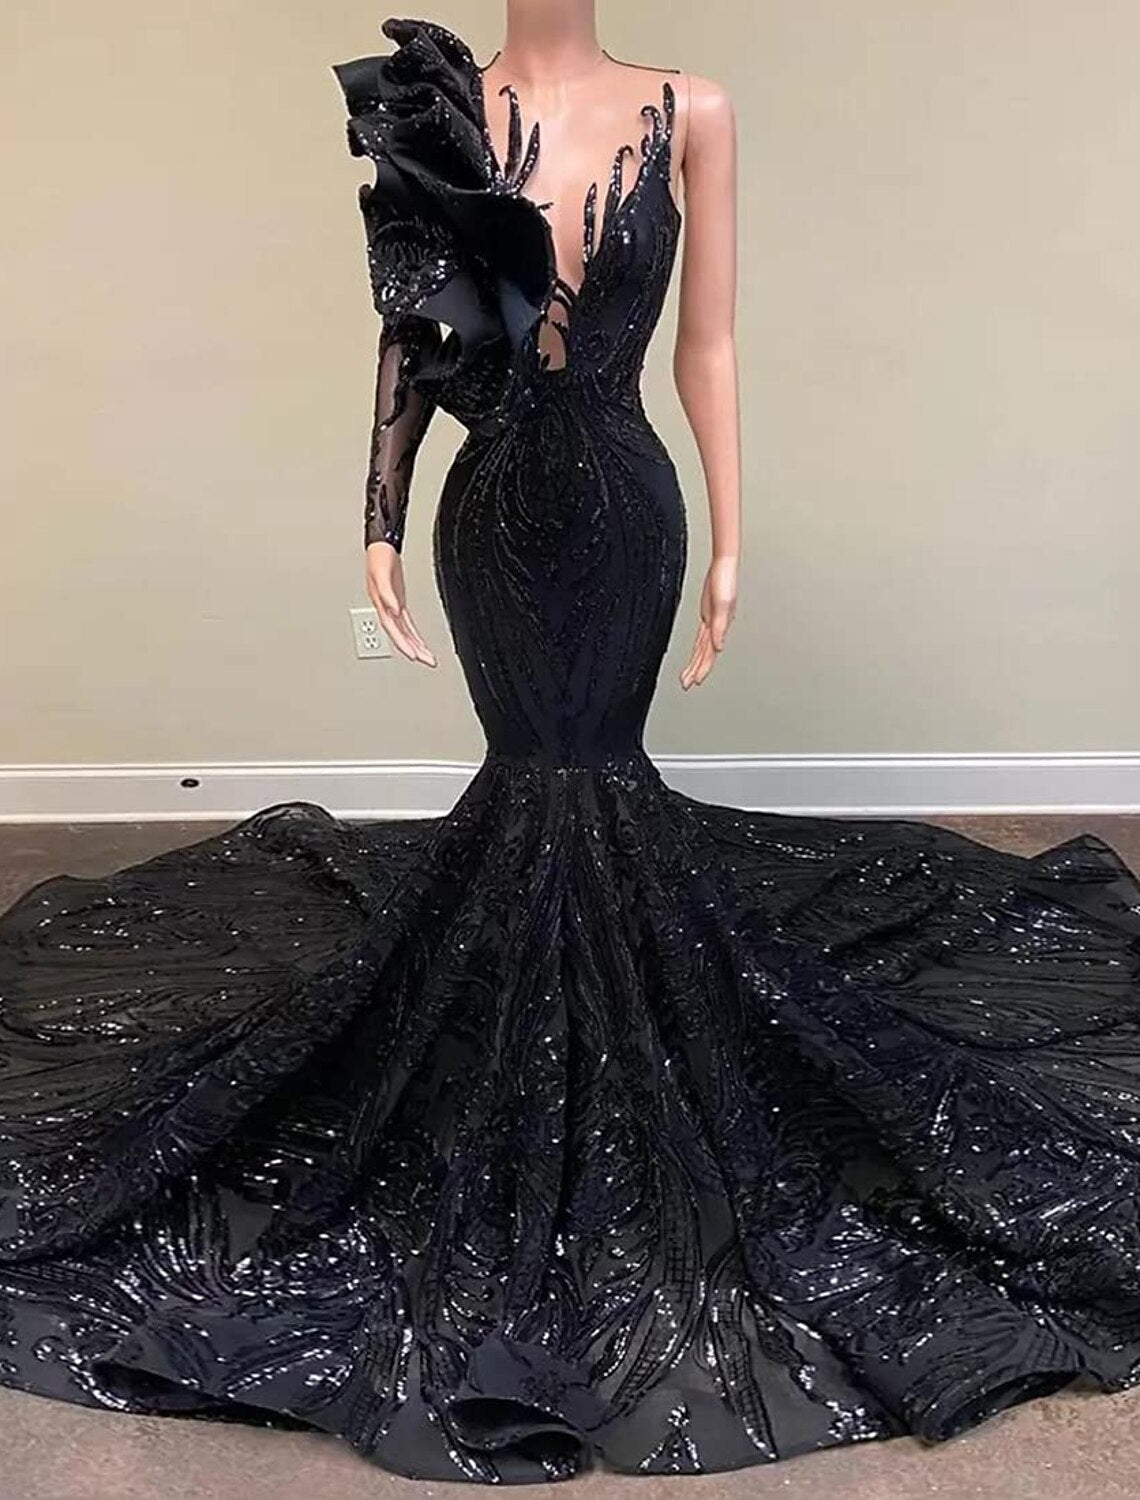 Mermaid Party Dress Evening Gown Sparkle & Shine Dress Engagement Formal Evening Court Train Long Sleeve One Shoulder Sequined with Sequin